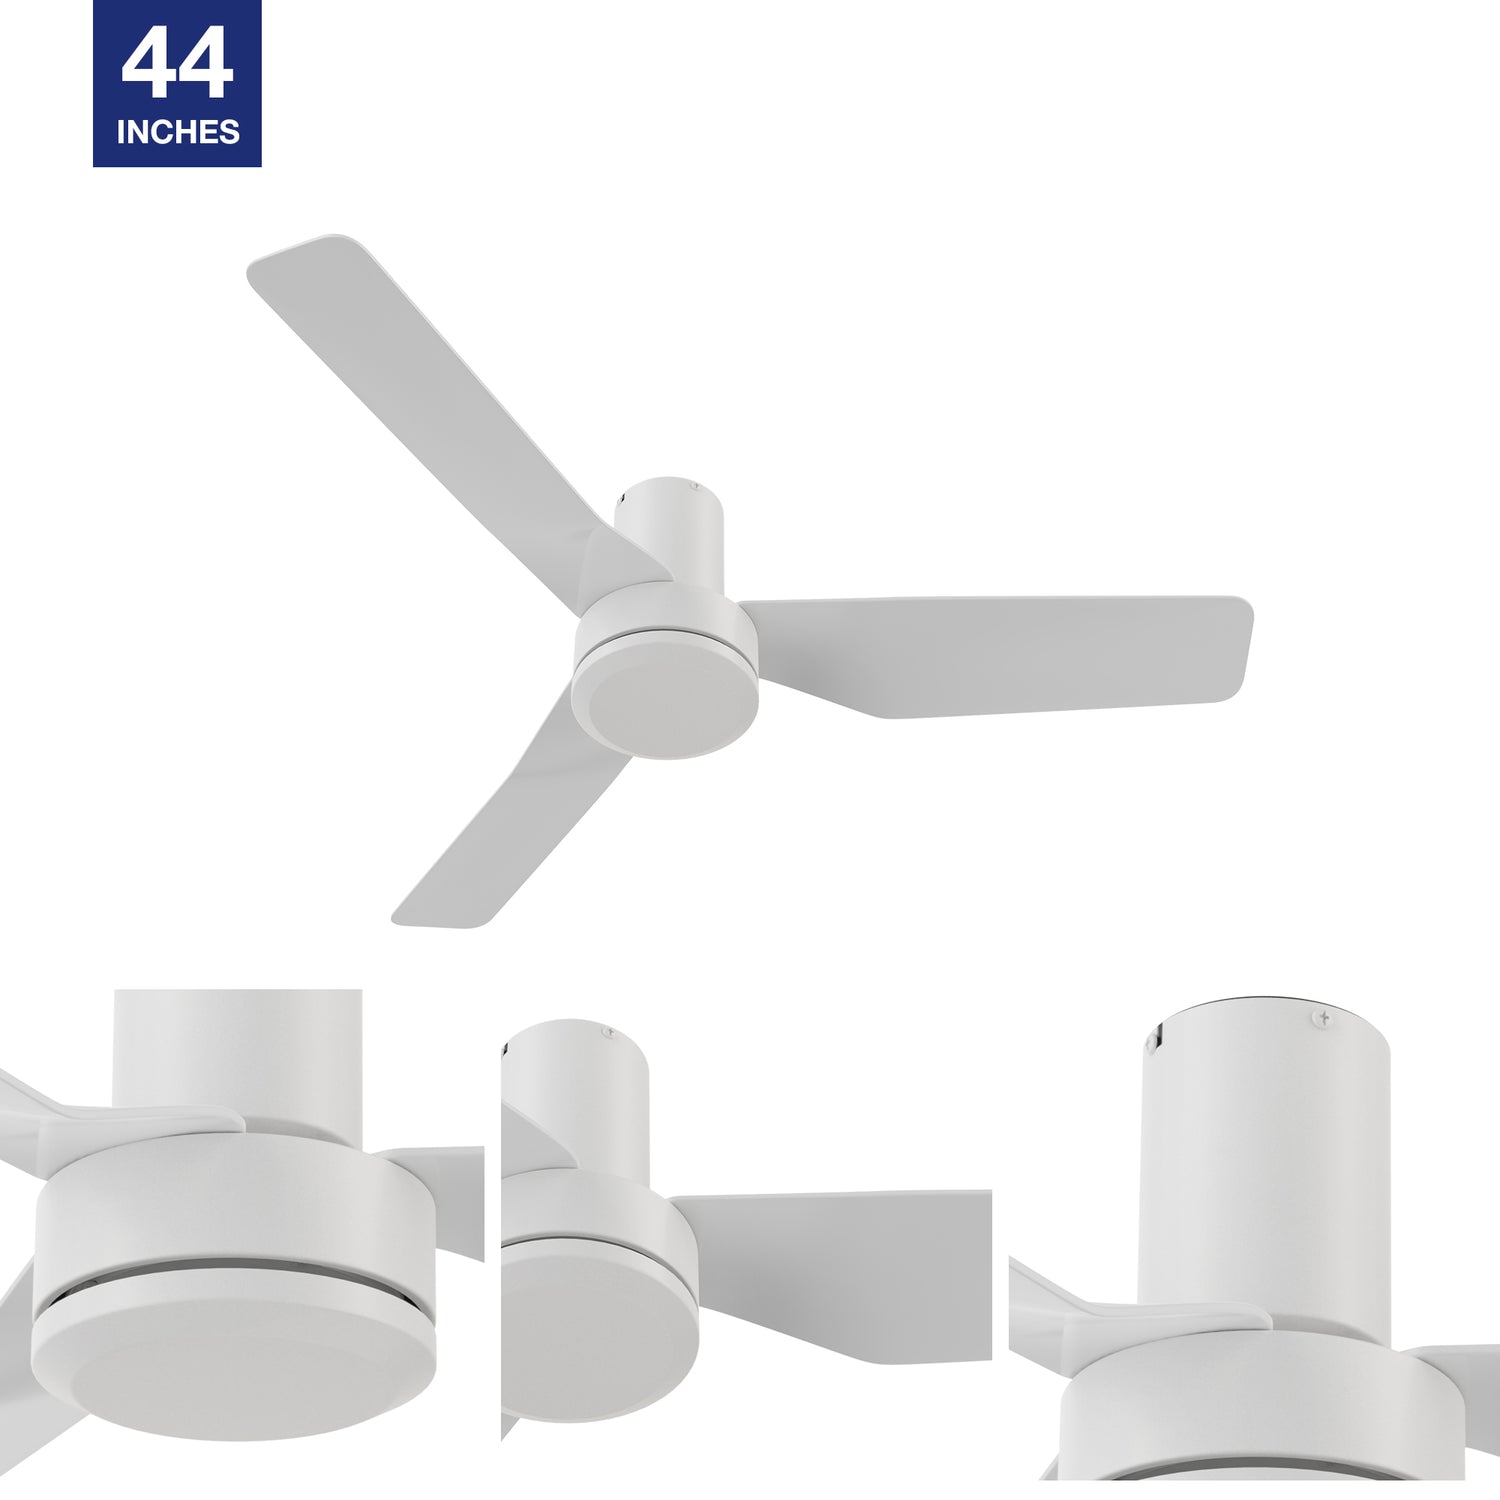 44in modern downrod mounted ceiling fan designs with white low profile rod and durable ABS fan blades. 